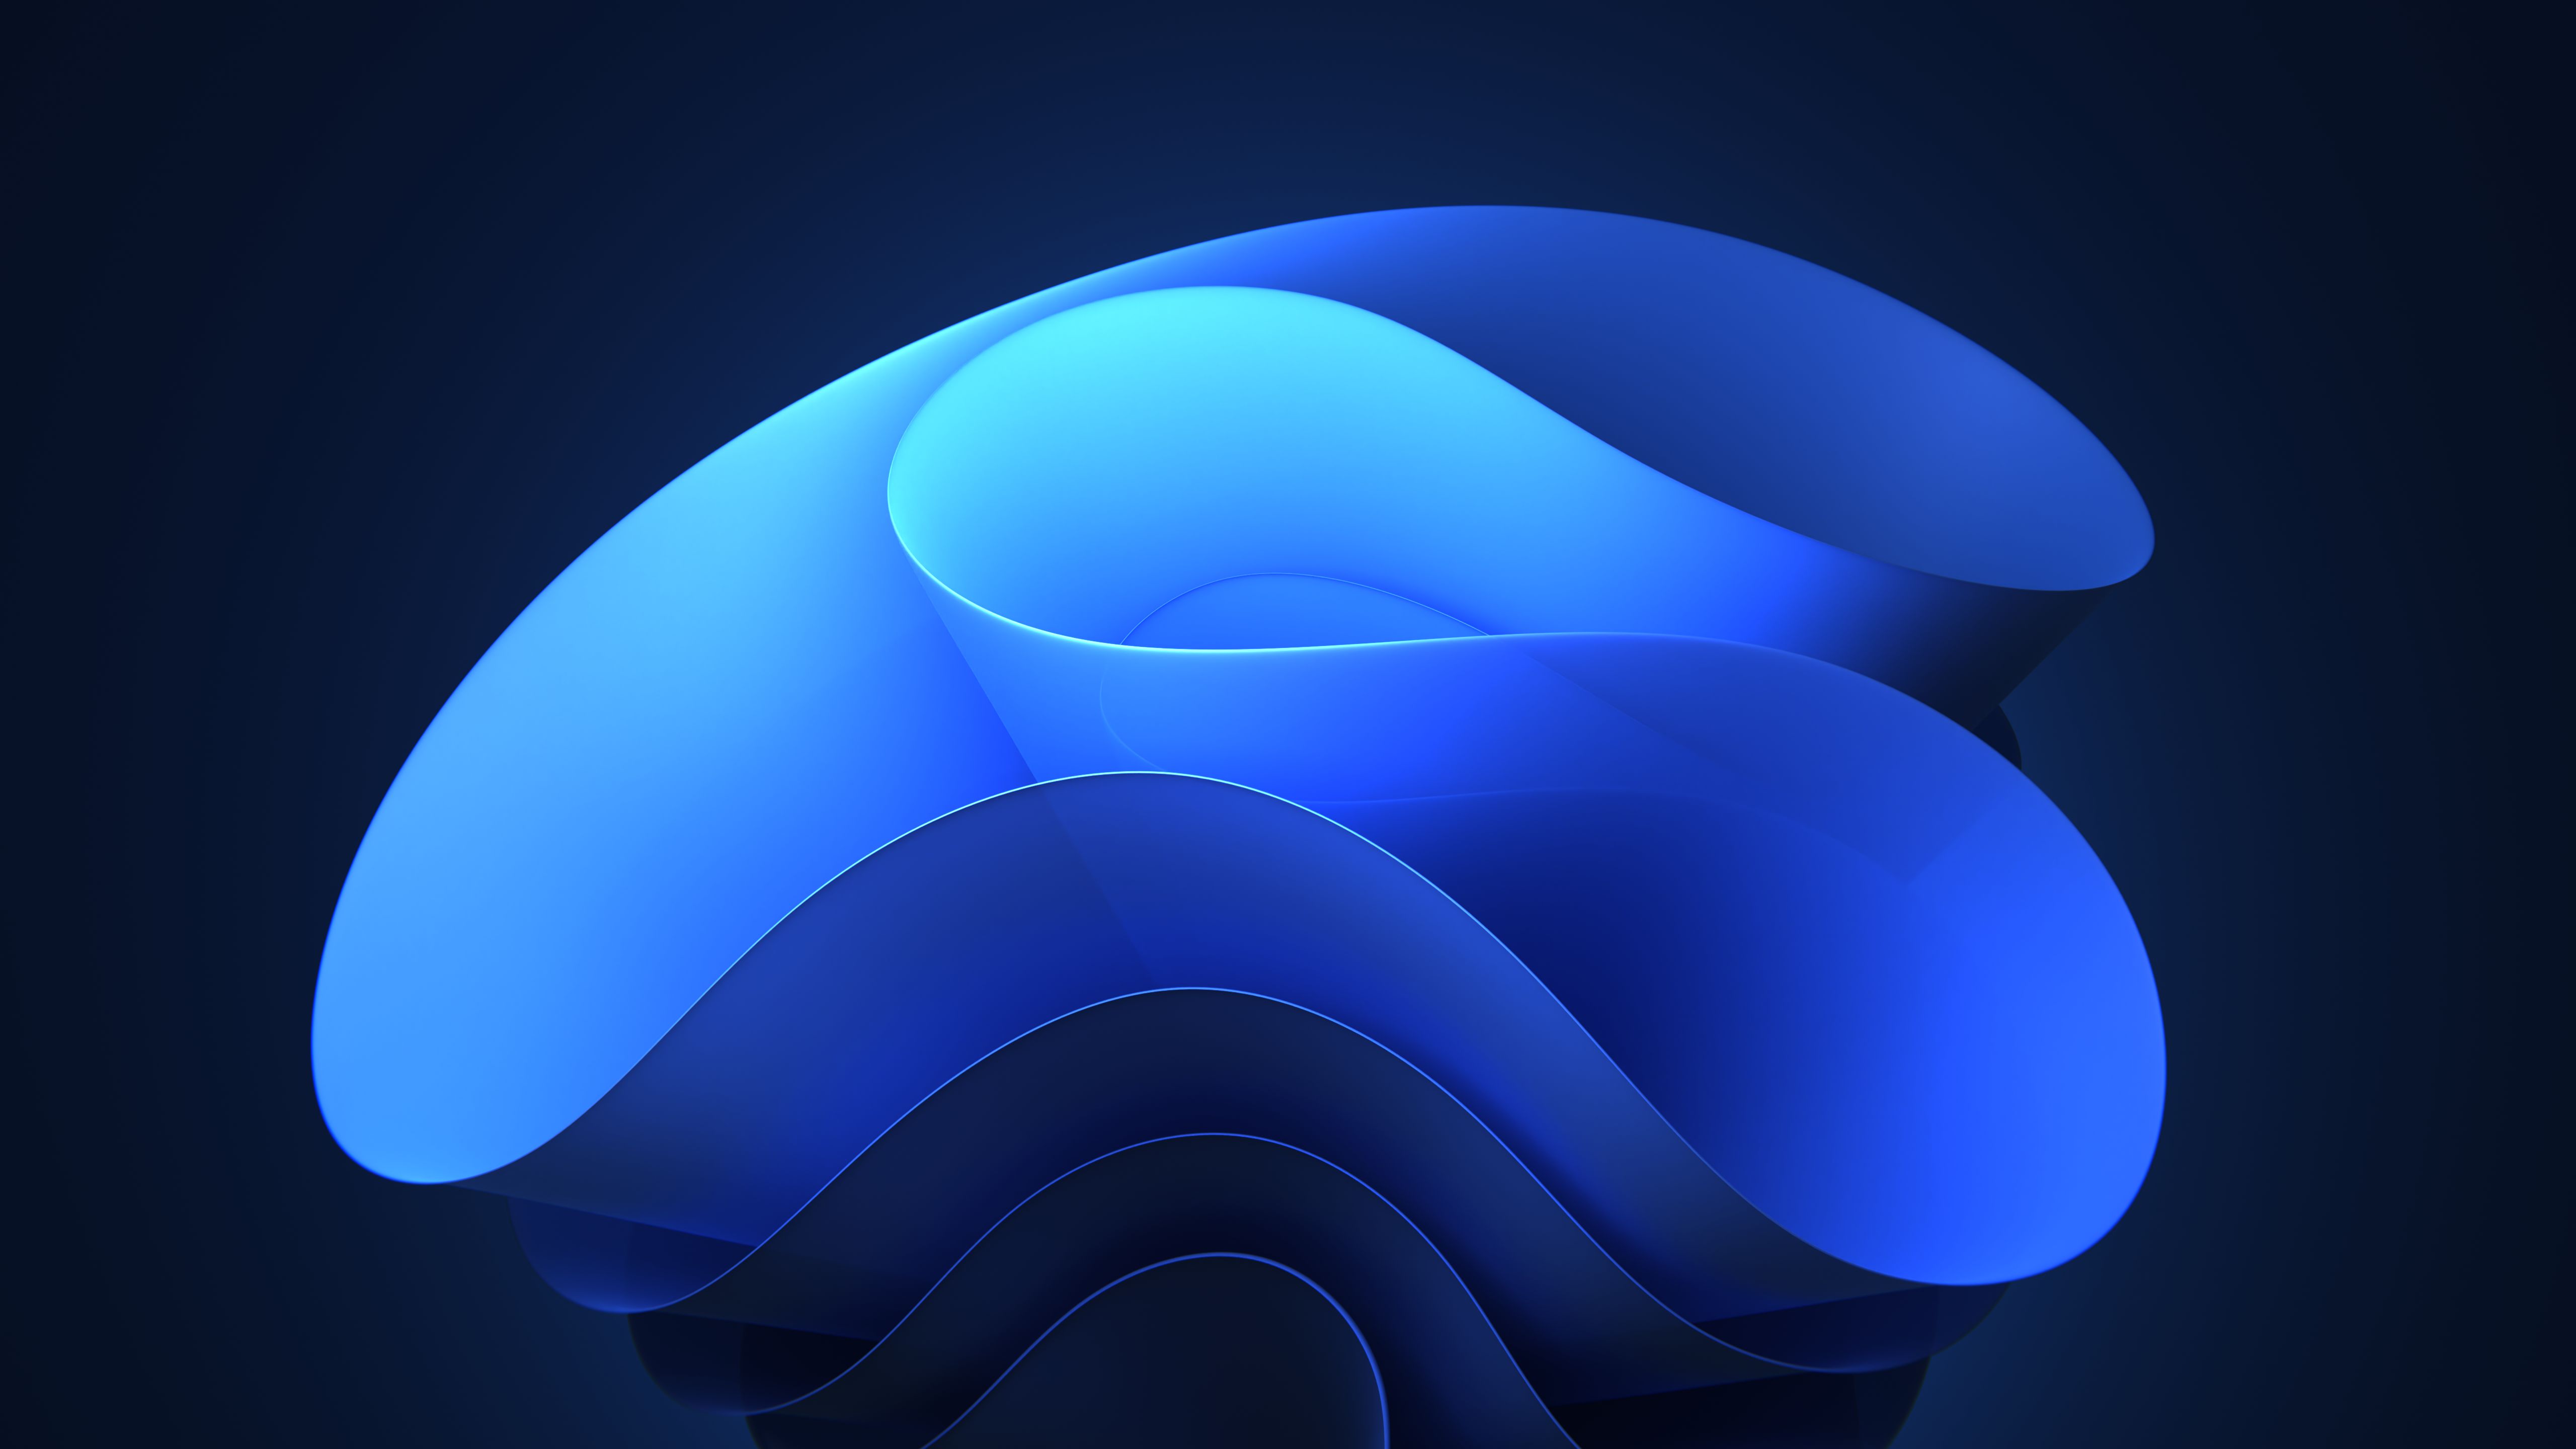 General 5120x2880 simple background minimalism blue background digital art shapes abstract